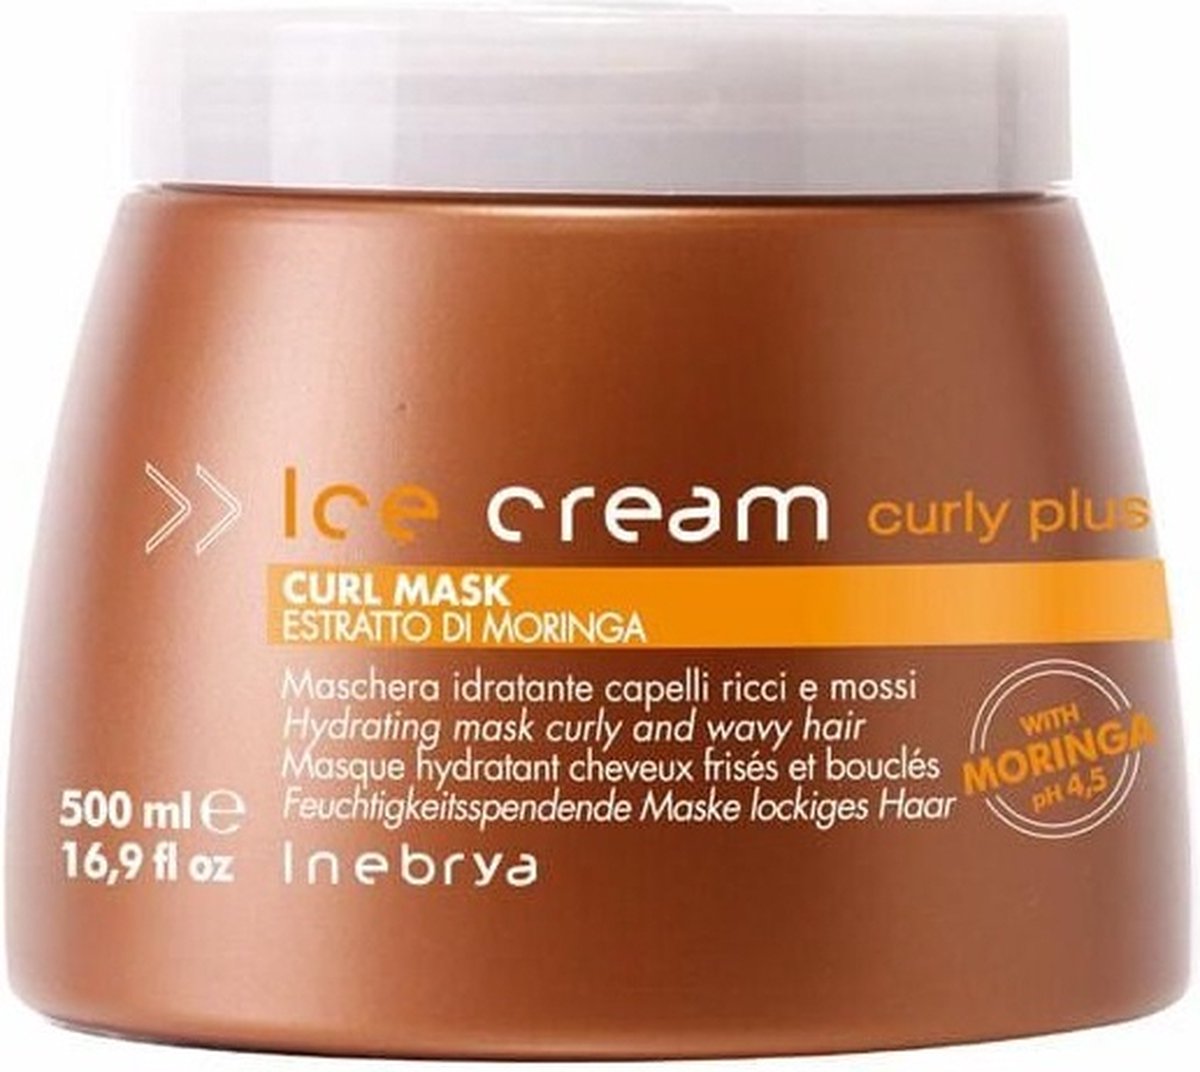 Inebrya - Mask for Curly Hair or Hair after Permanent Ice Cream Curl y Plus ( Curl Mask) 500 ml - 500ml